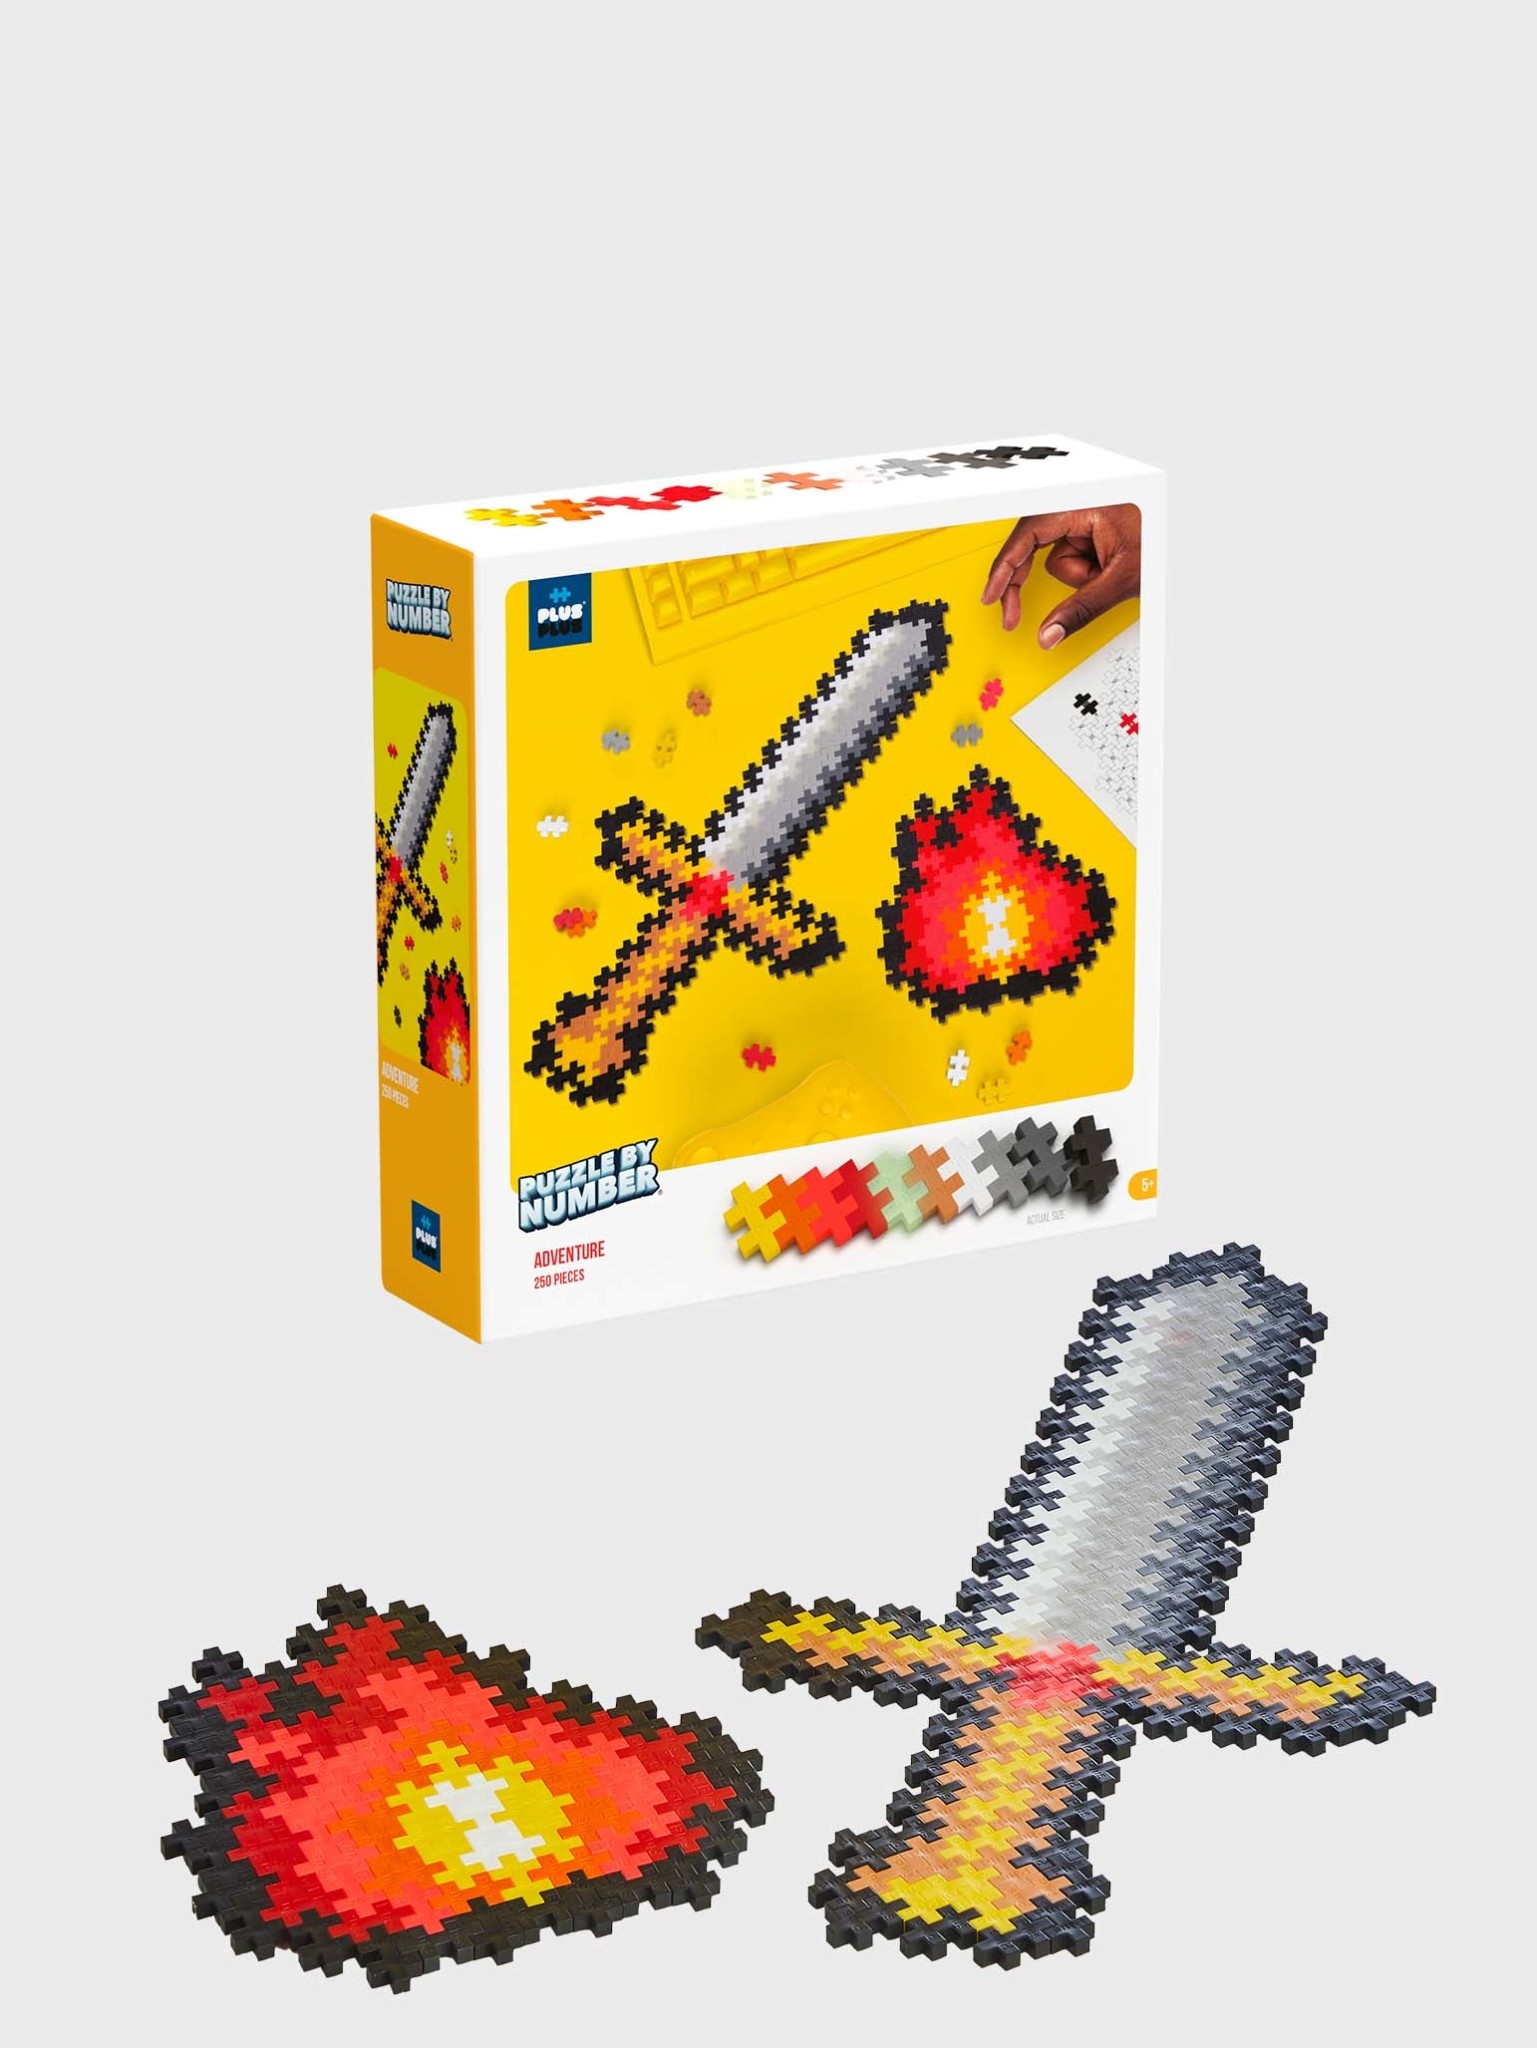 PLUSPLUS - 'Puzzle by Numbers - Adventure (Sword and Flame)' Set - 250